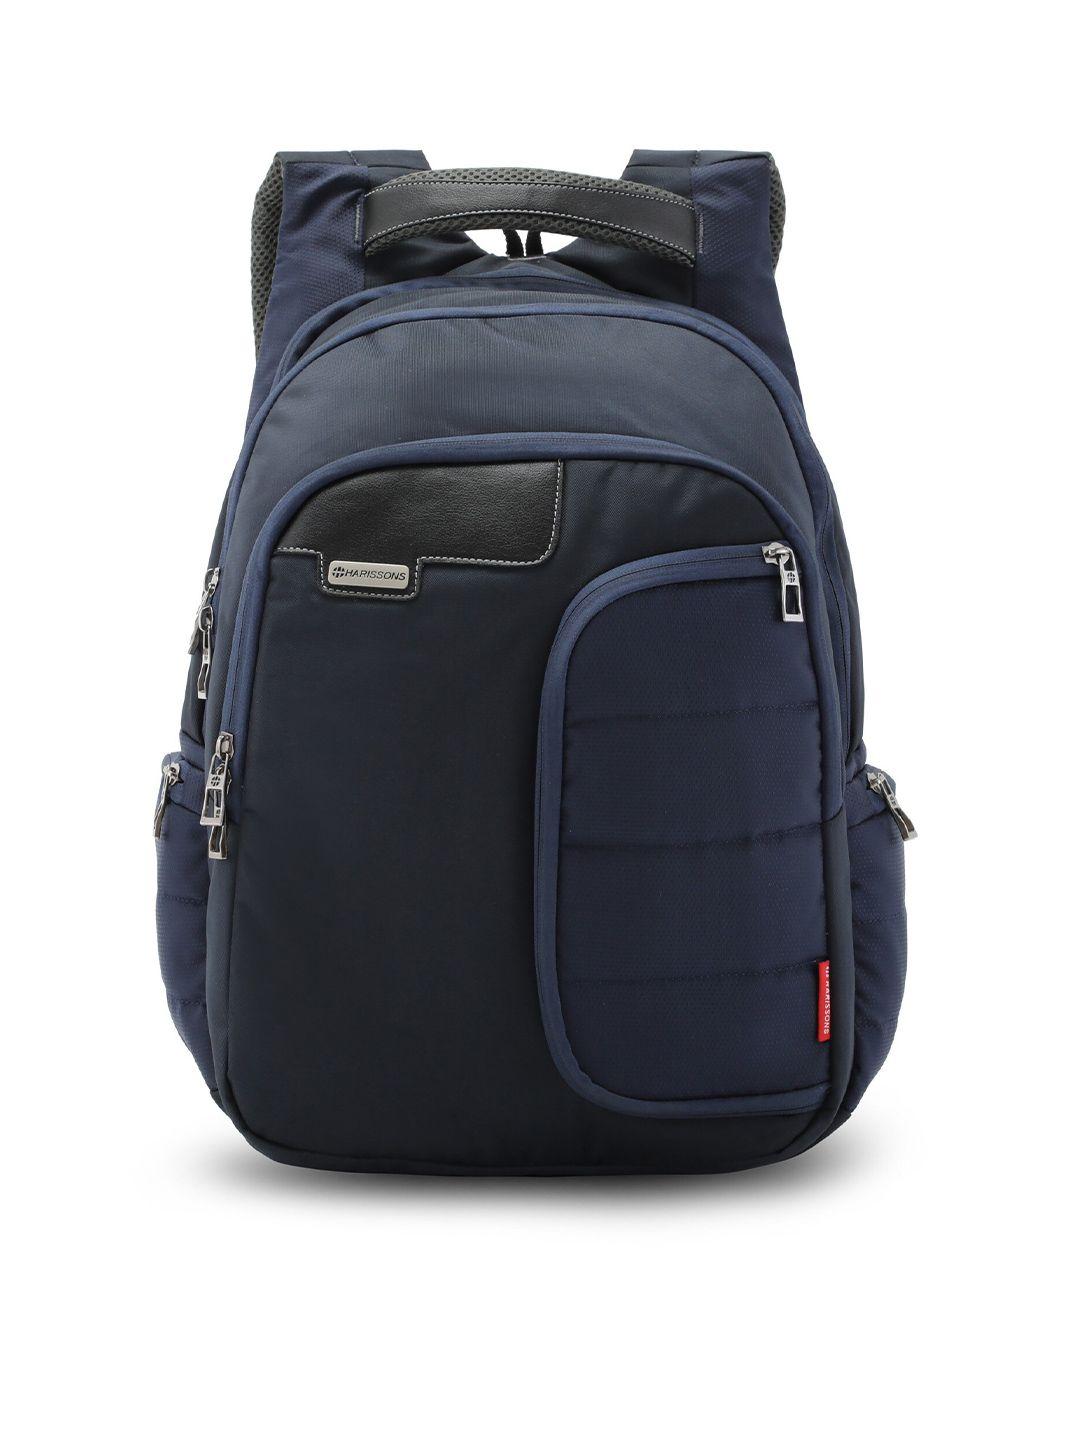 harissons unisex navy blue backpack with usb charging port